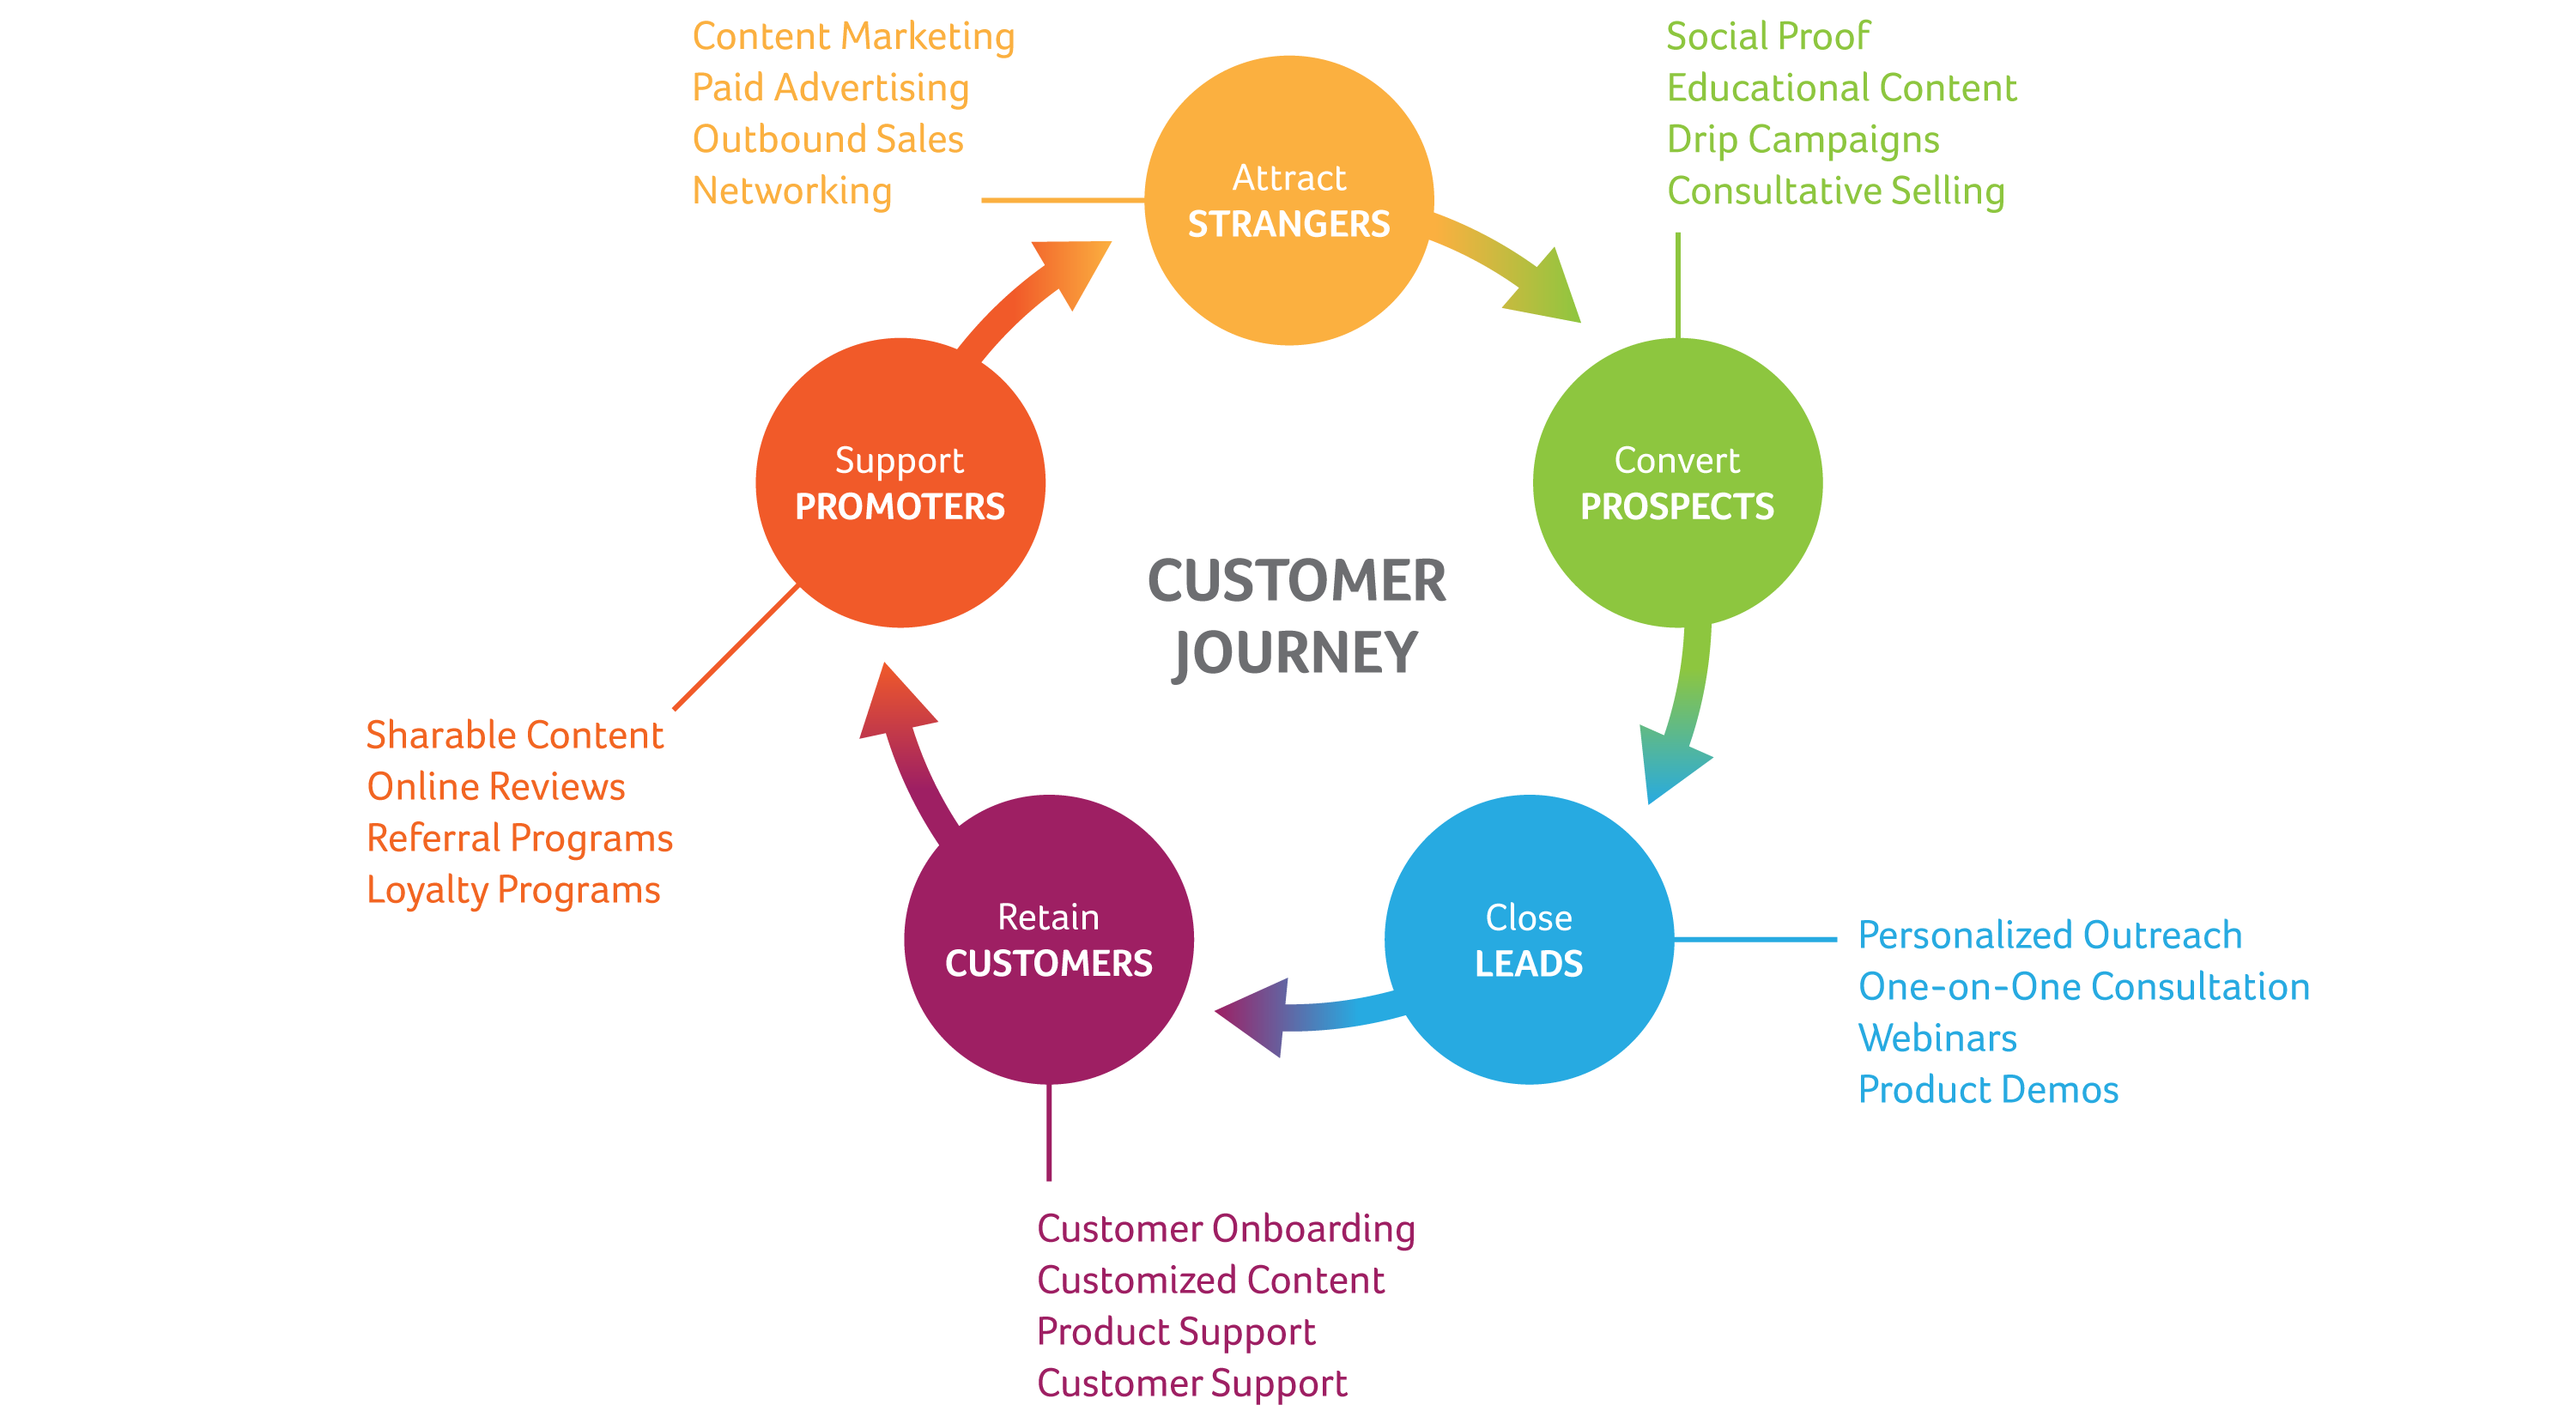 A cyclical customer journey allows for the continuation of a relationship with your clients. Having a strategy around which marketing channels are activated driven by the intent of the touchpoint provides a consistent journey for your client.